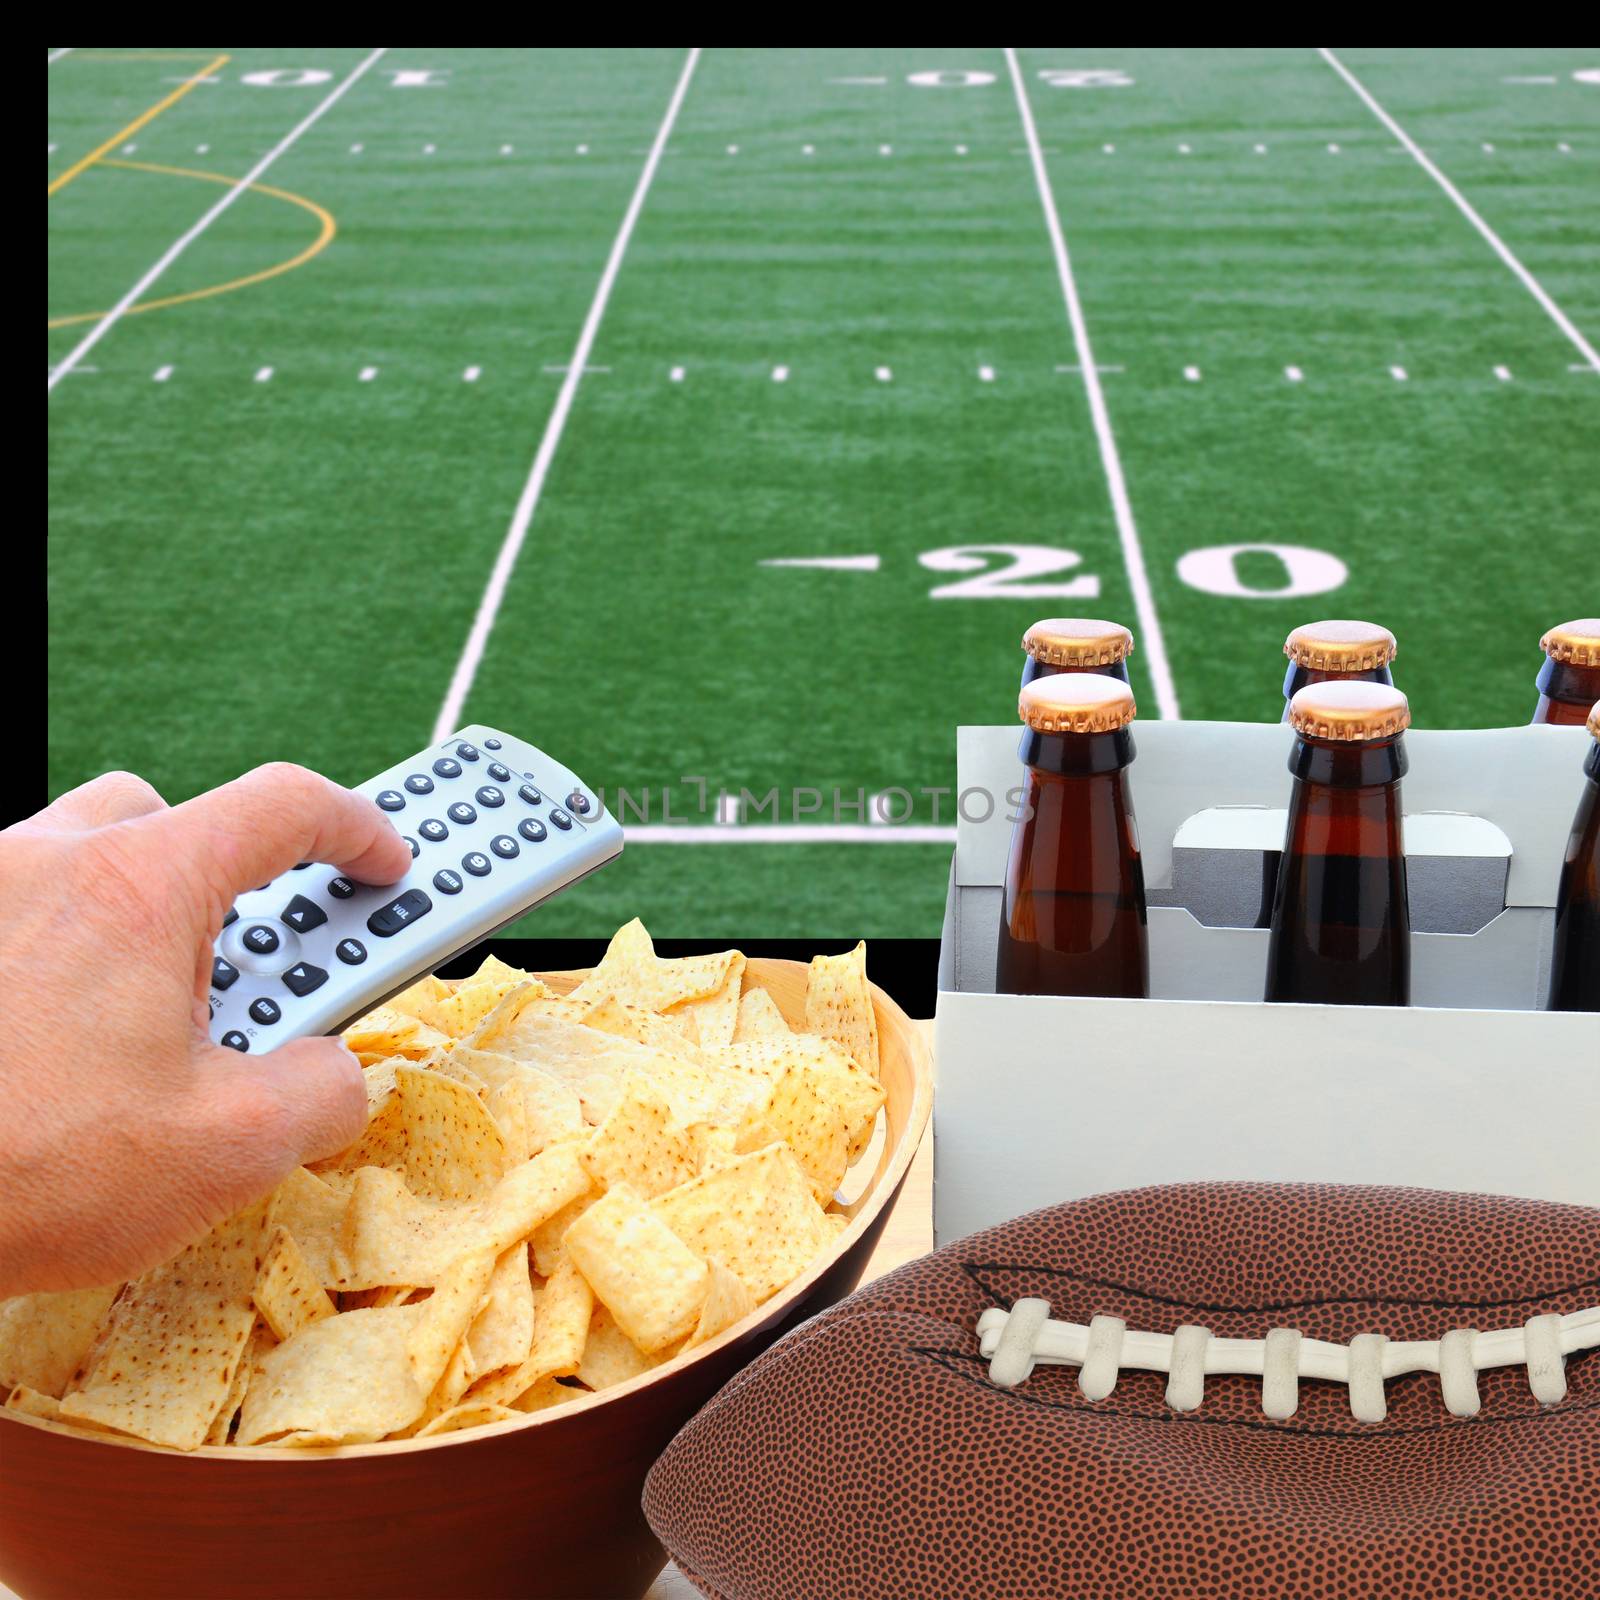 Deflated Football TV Screen Beer and Chips by sCukrov